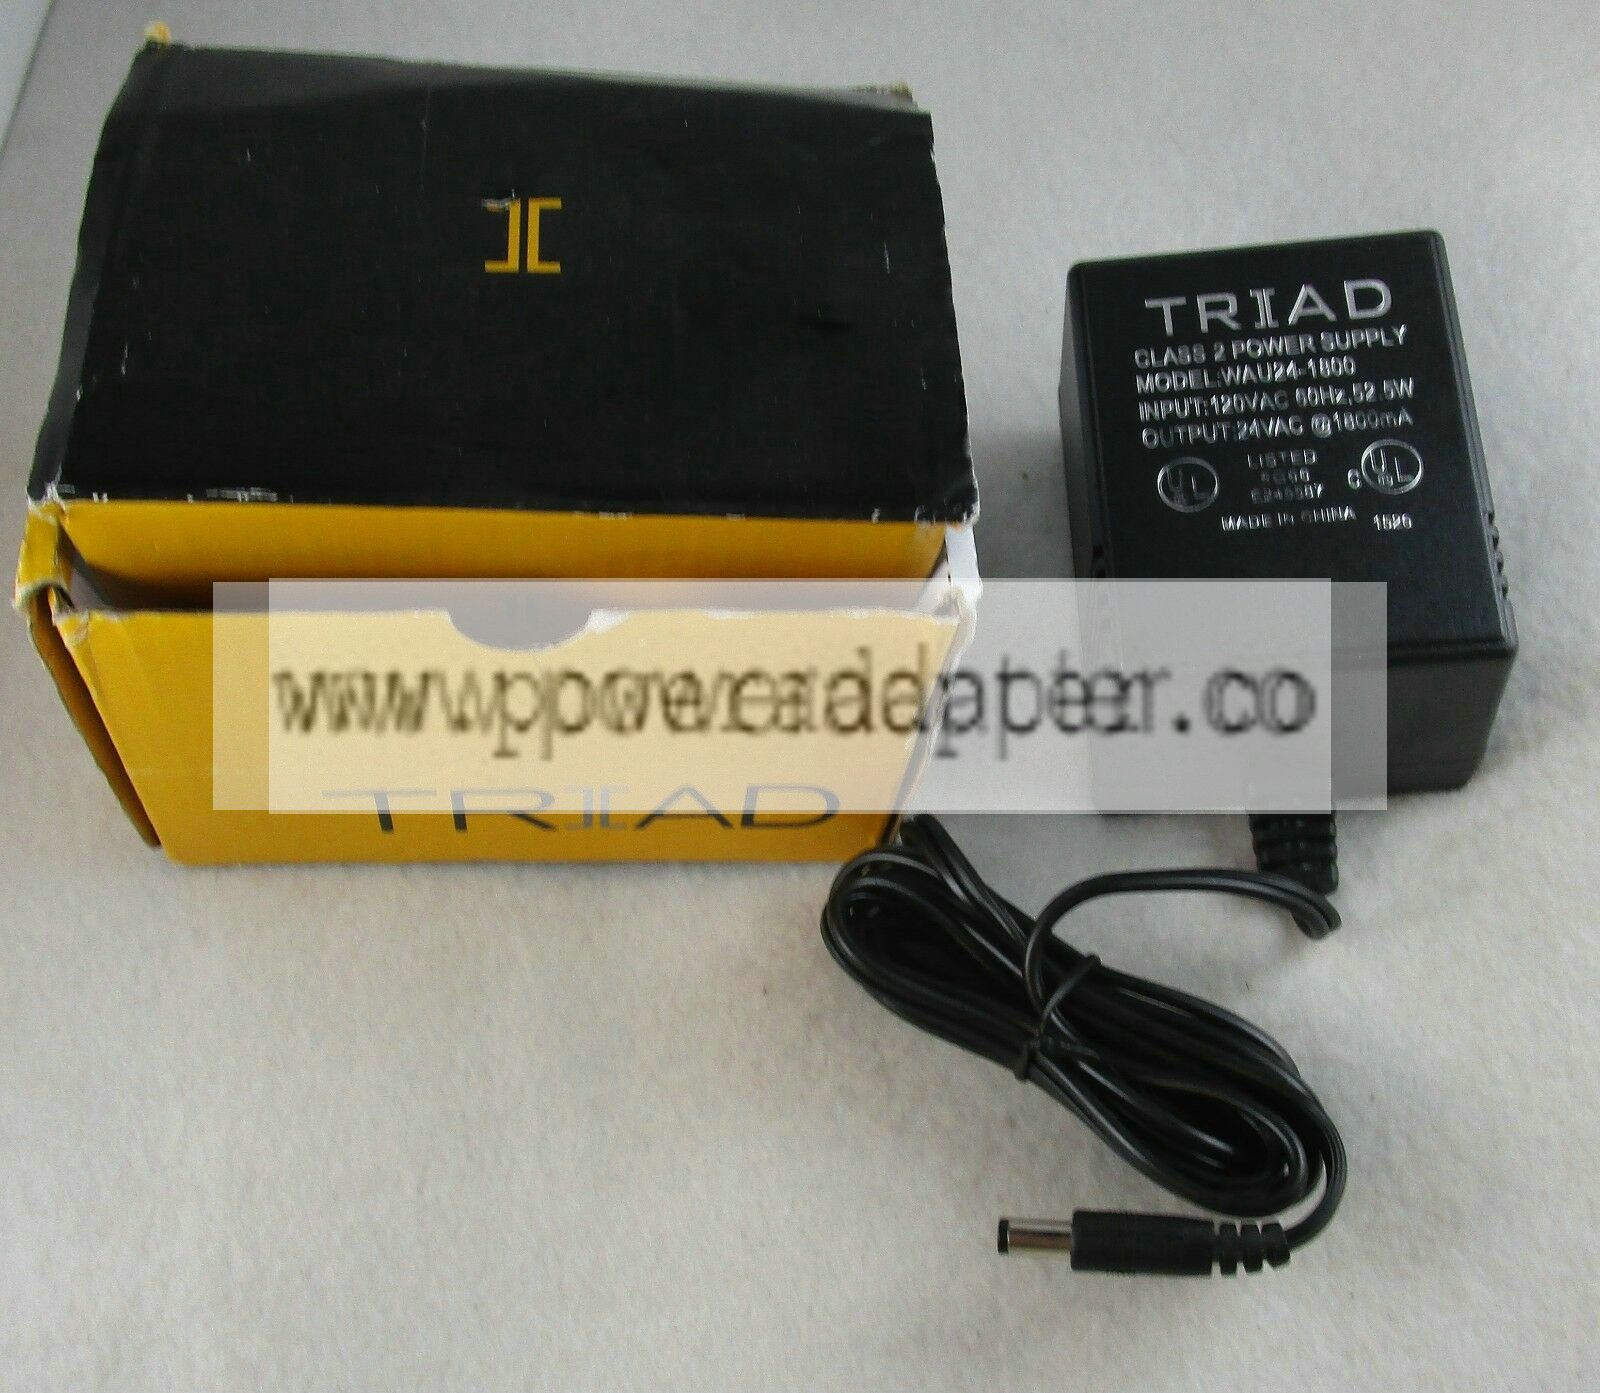 Triad Magnetics AC to AC Power Supply Cord Cable Adapter WAU24-1800 MPN: WAU24-1800 Output Voltage(s): 24 V Brand: T